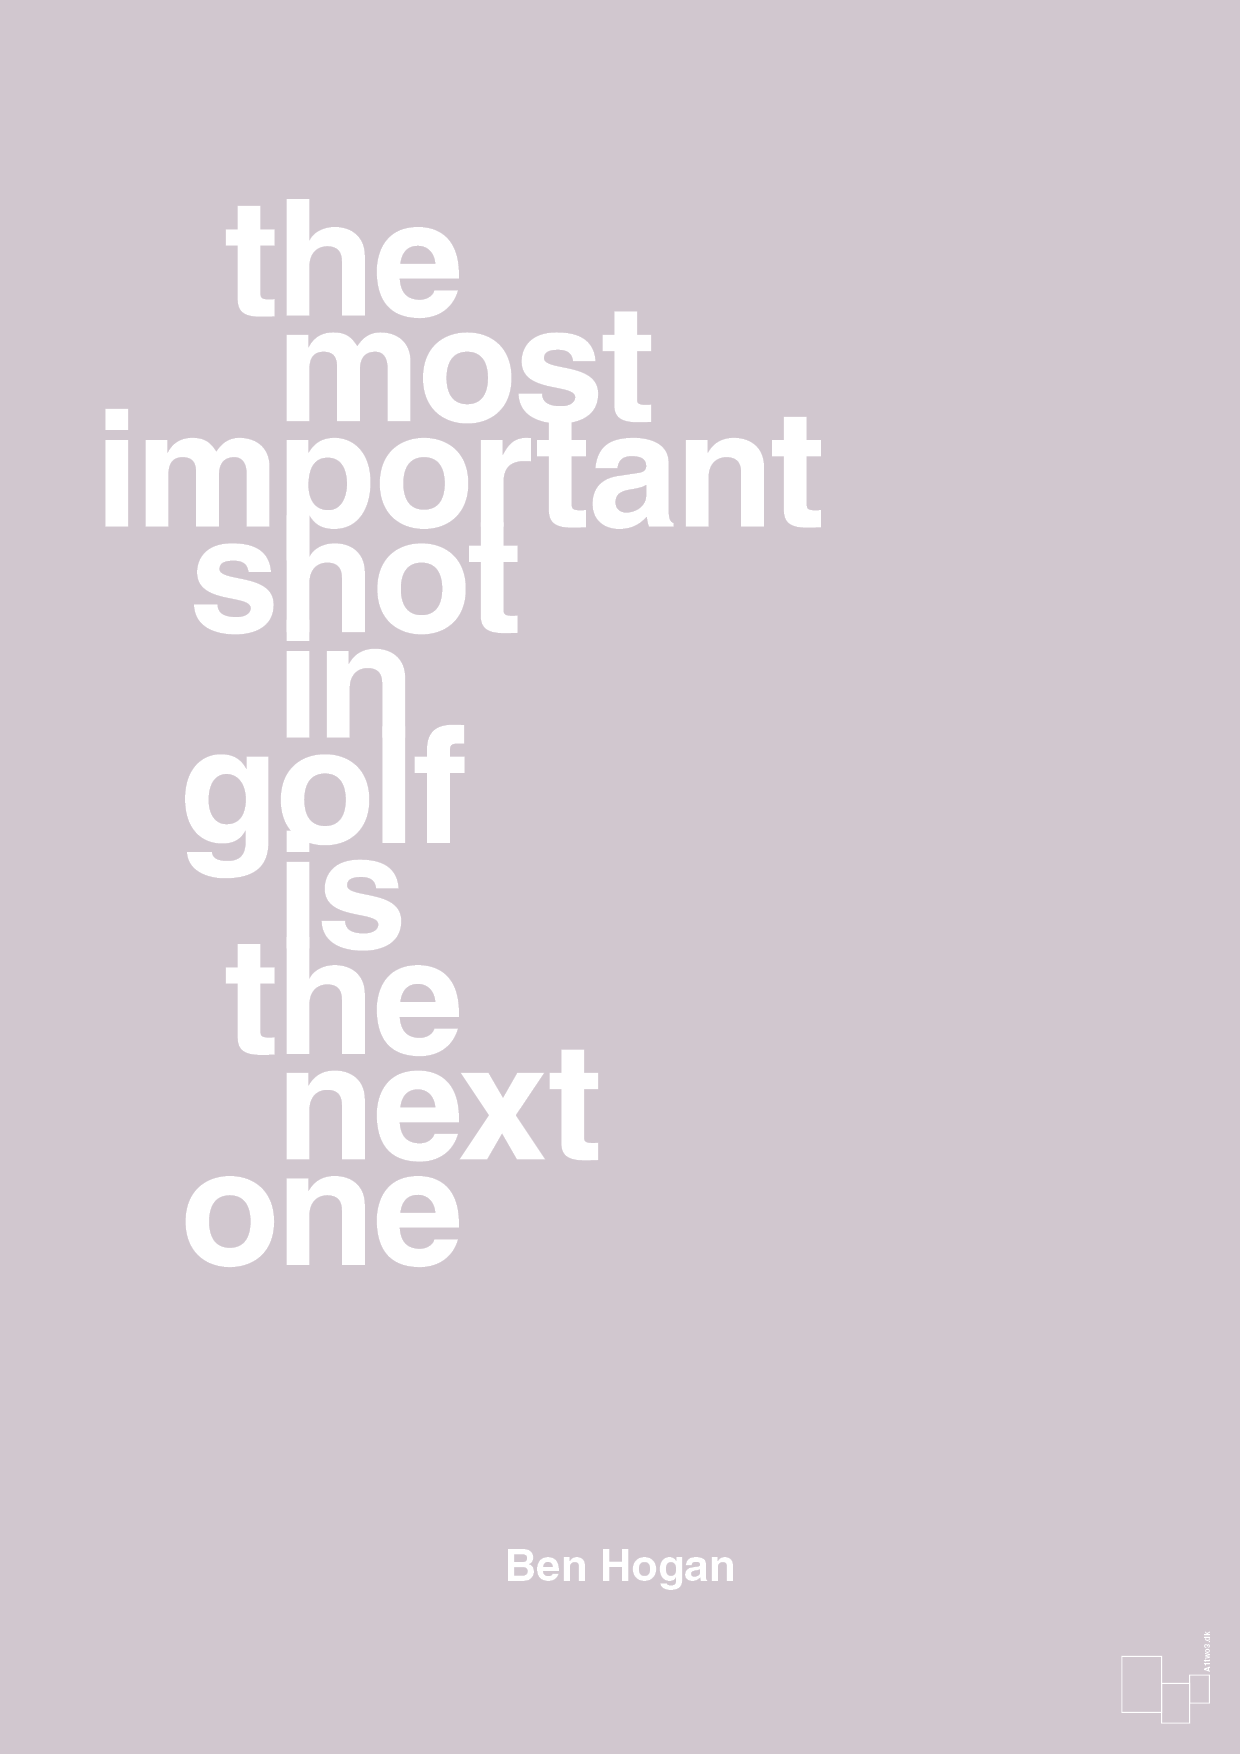 the most important shot in golf is the next one - Plakat med Citater i Dusty Lilac